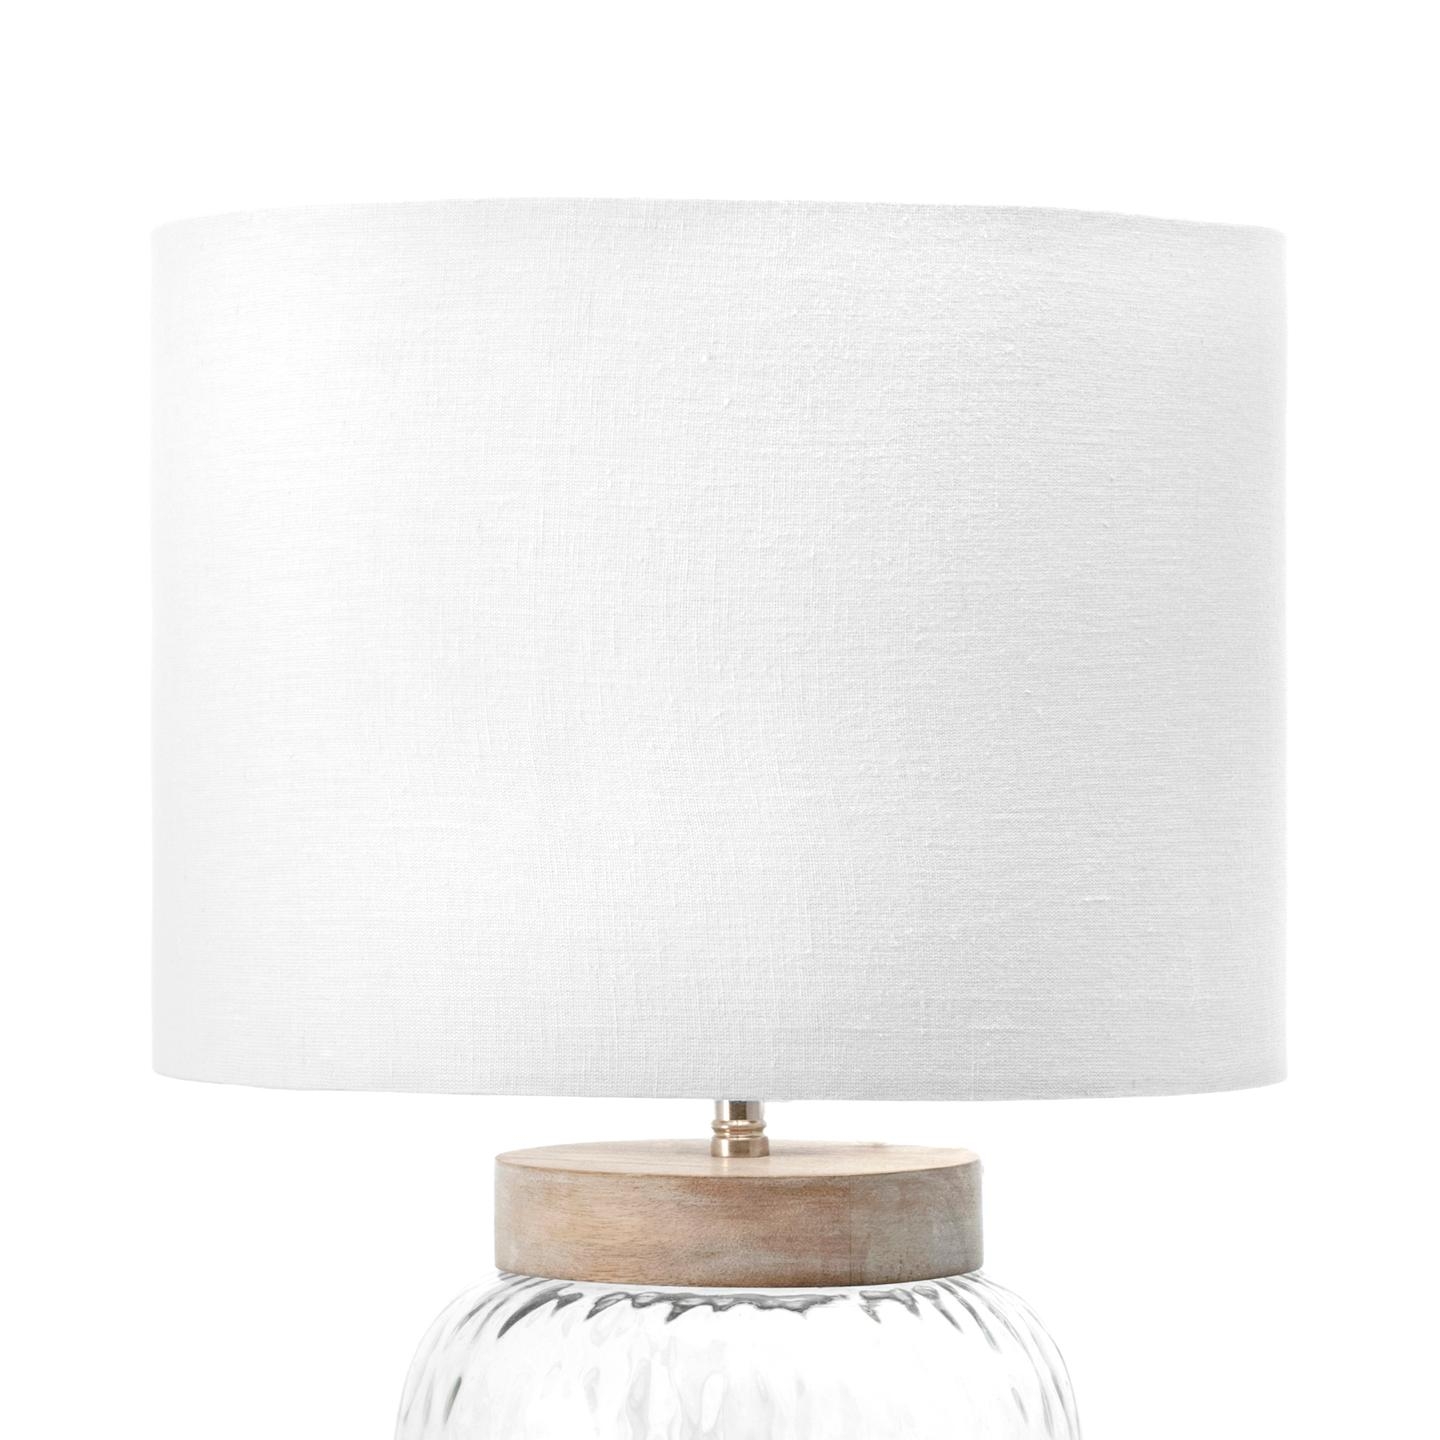 Haines Glass Table Lamp, 20" - Image 4